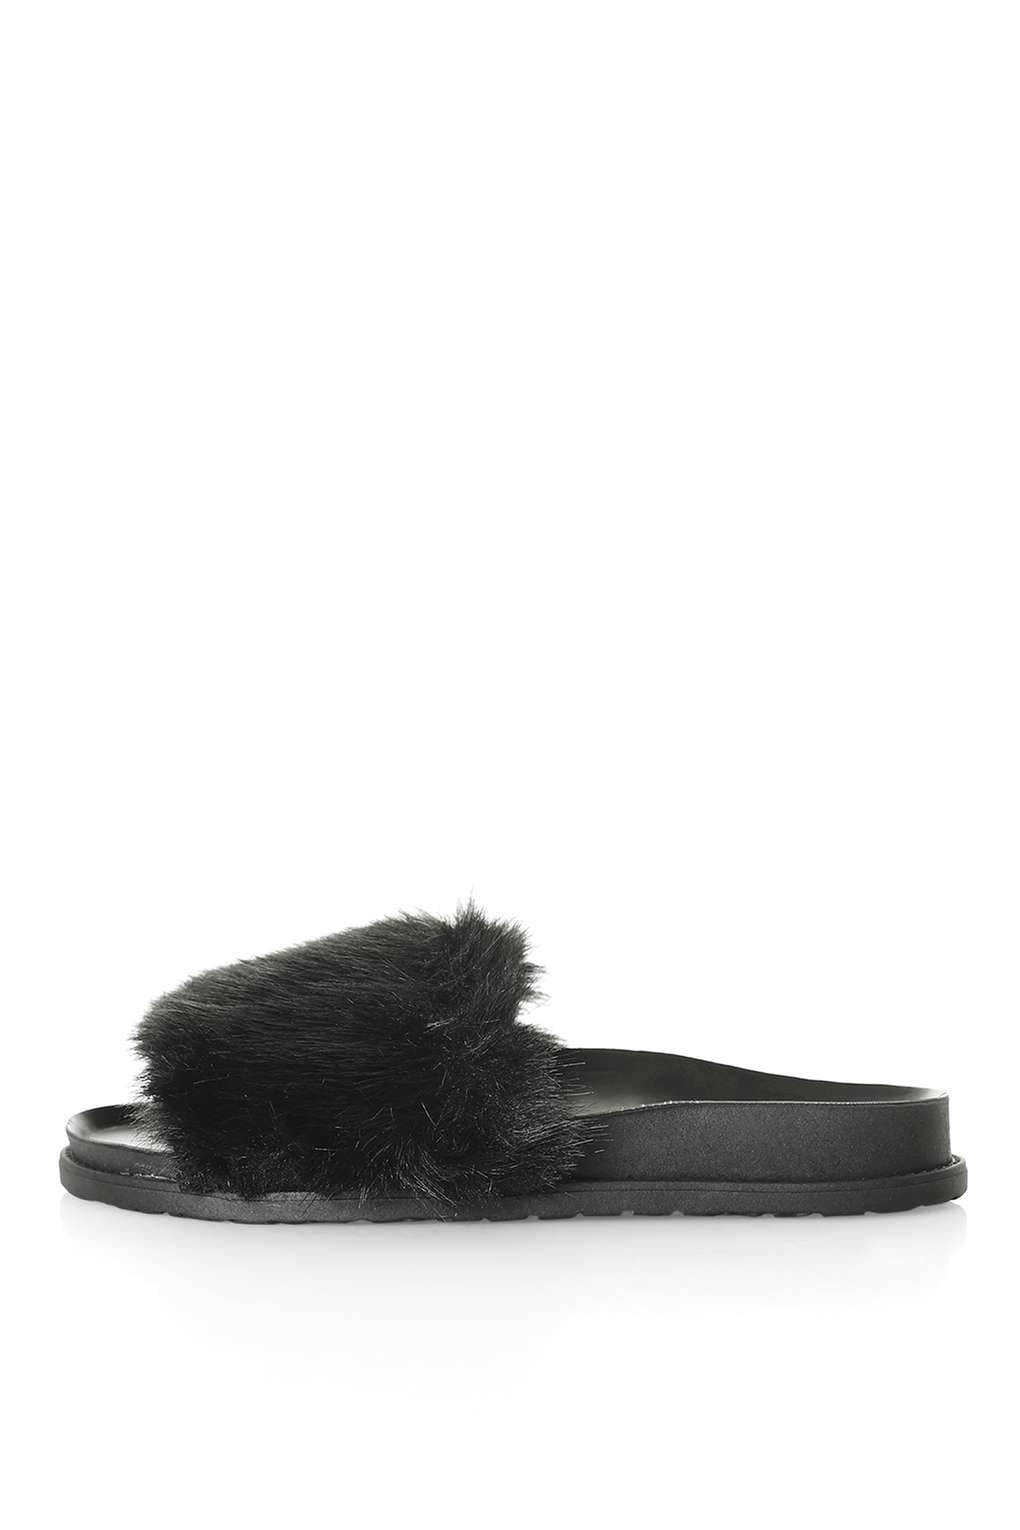 topshop slippers